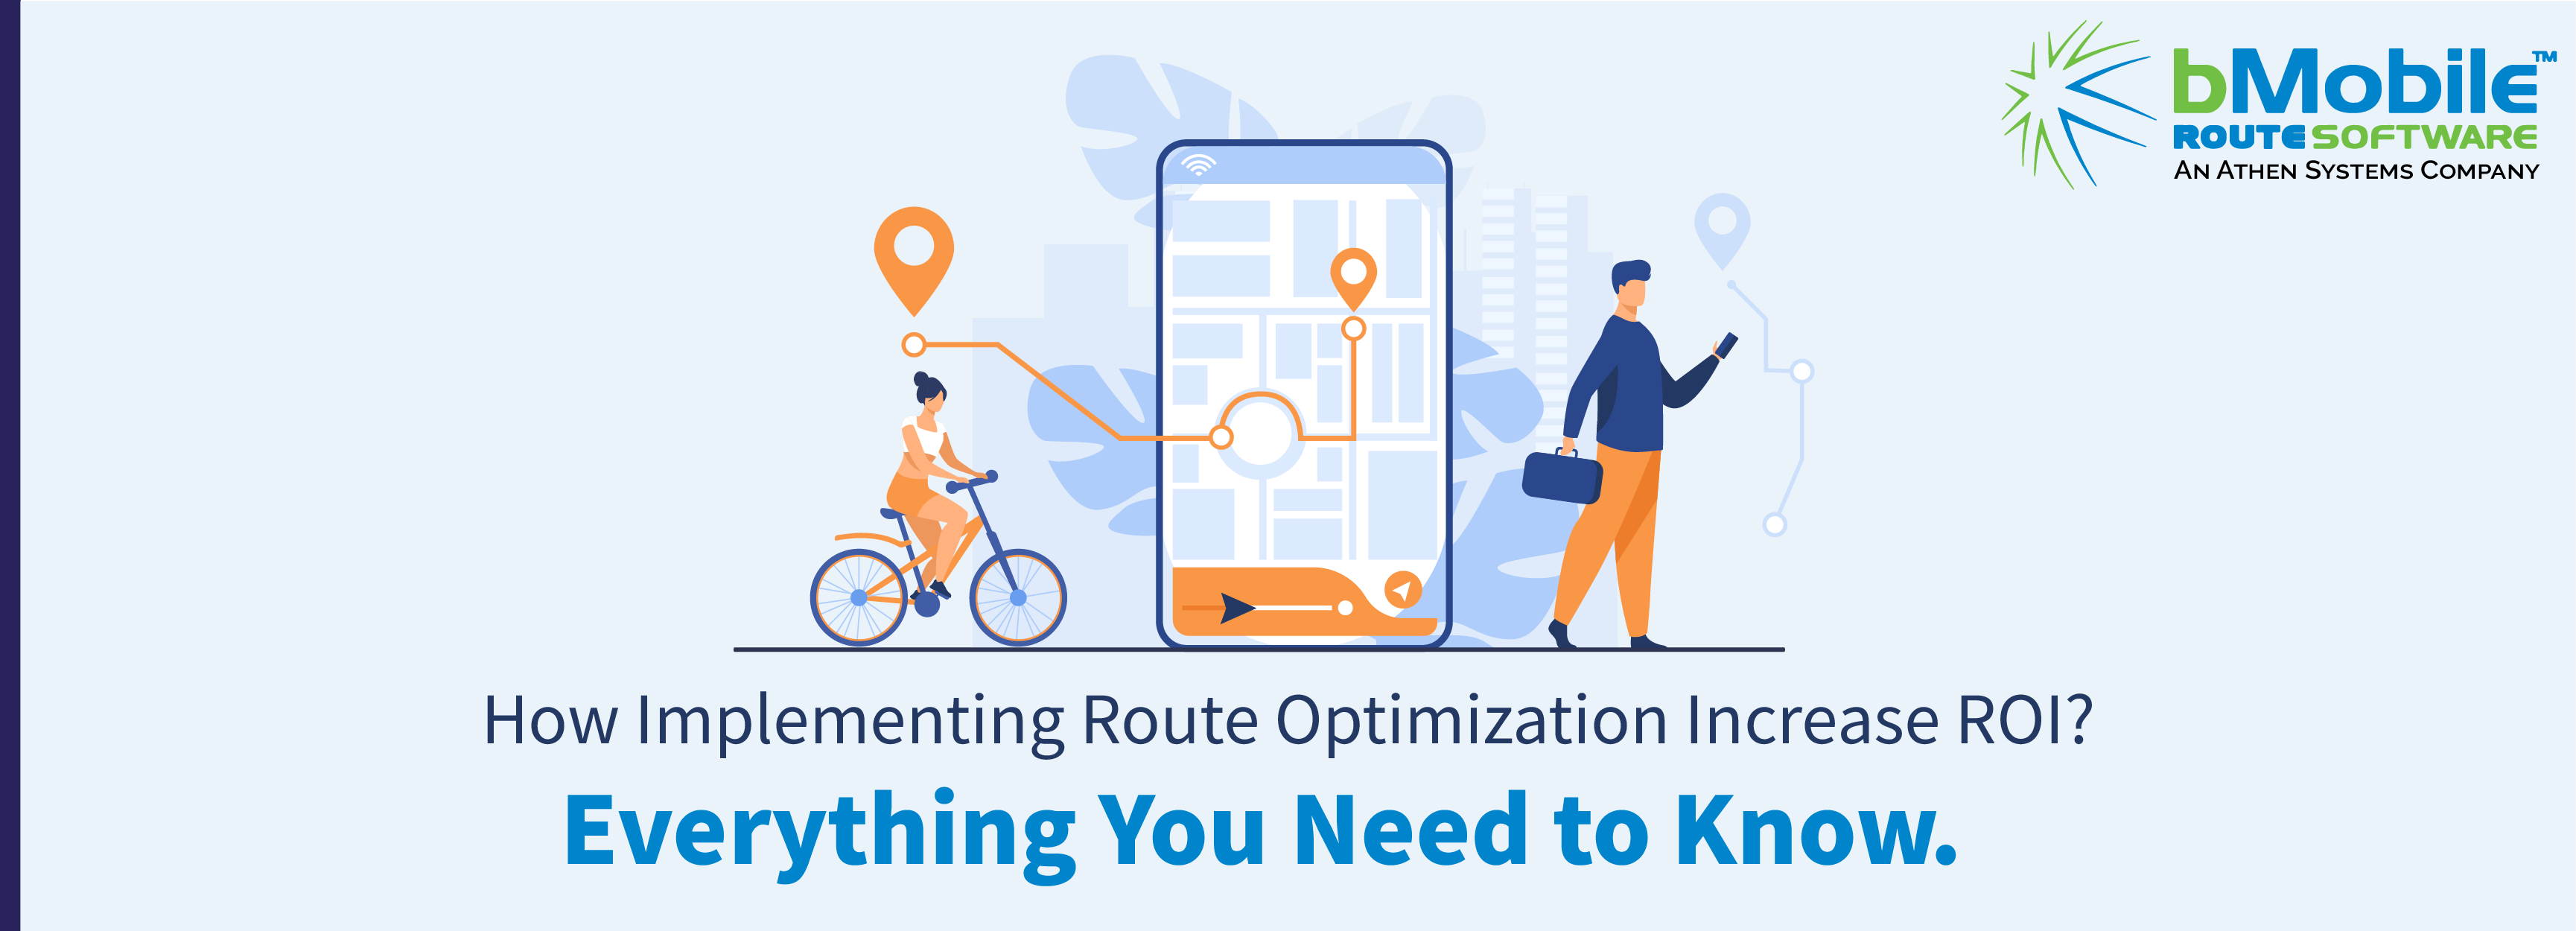 How Implementing Route Optimization Increase ROI? Everything You Need to Know.